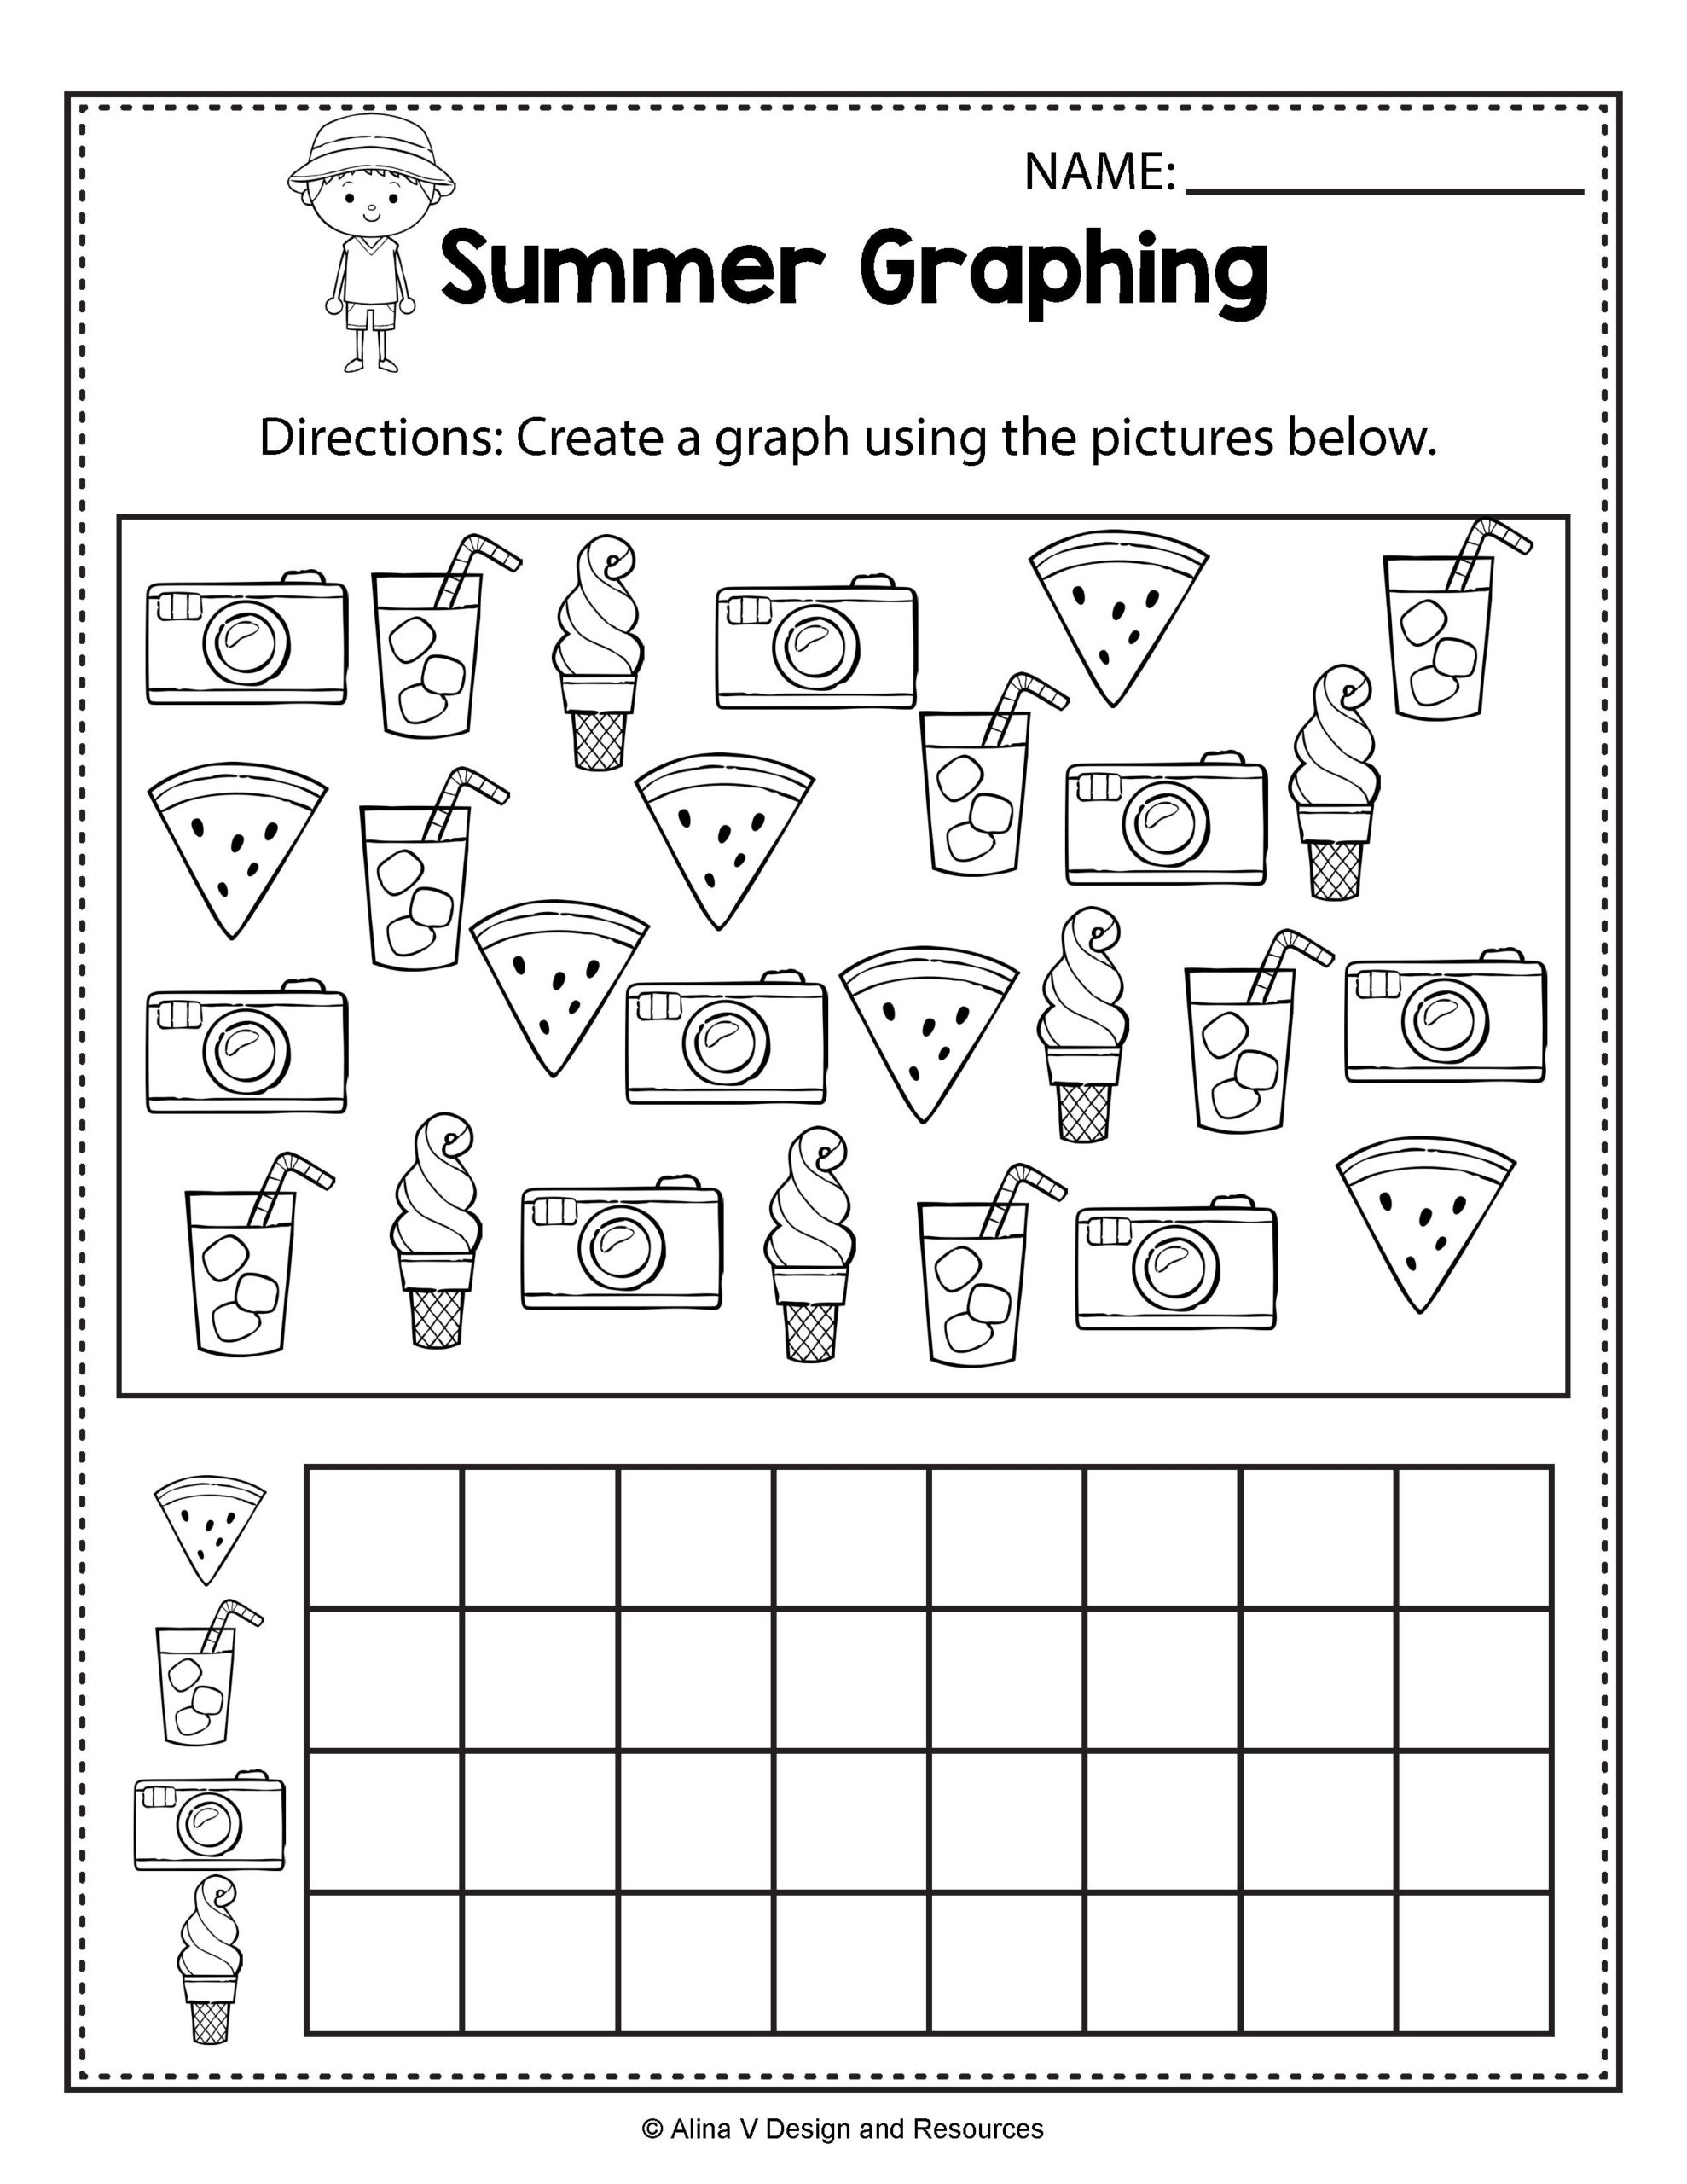 Summer Graphing Worksheets And Activities For Preschool